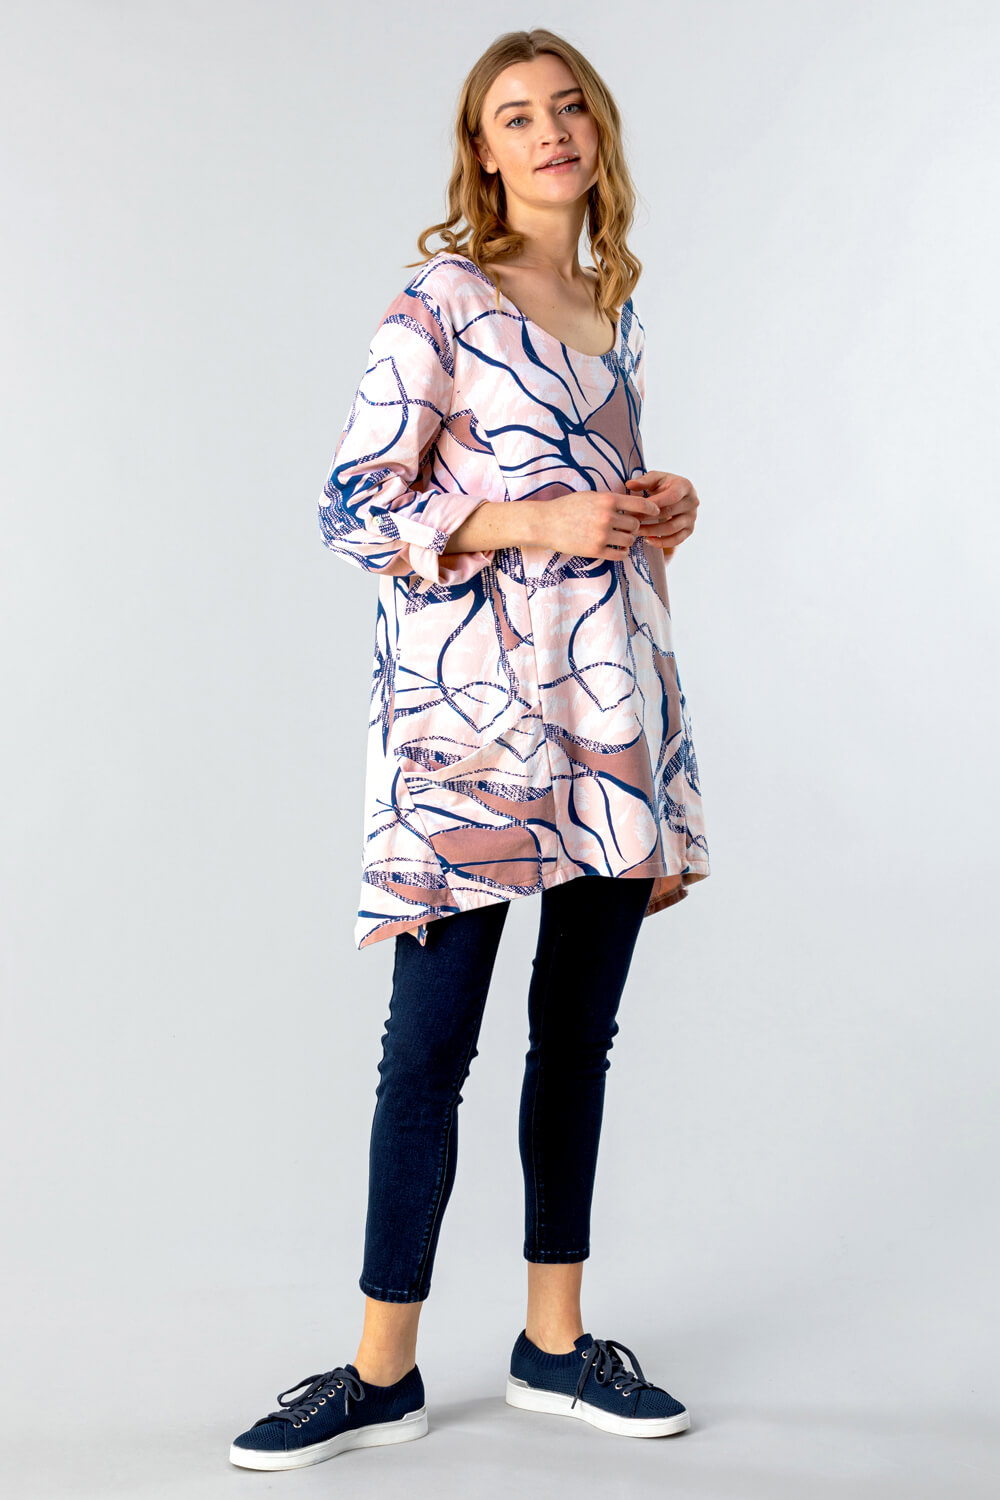 PINK Abstract Print Tunic Top with Pockets, Image 3 of 4